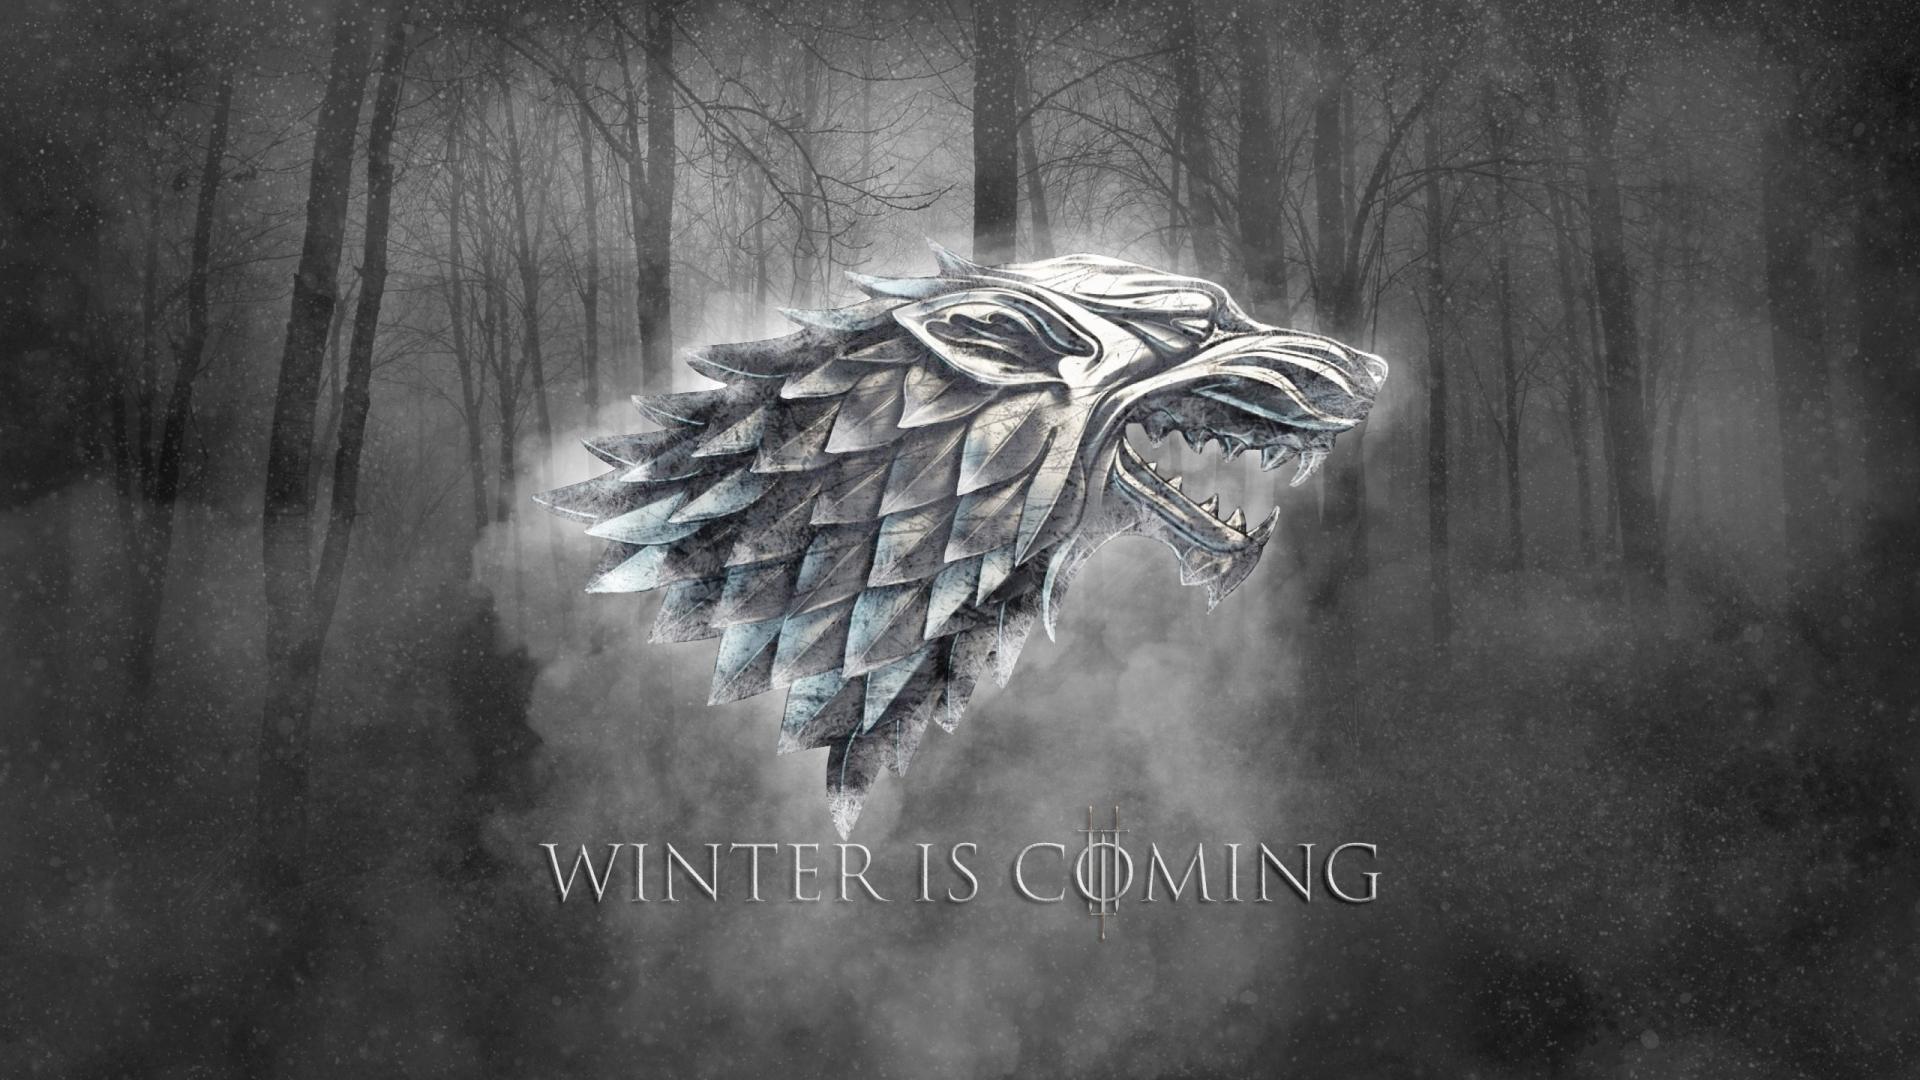 Game Of Thrones Wallpaper HD Winter Is Ing Image